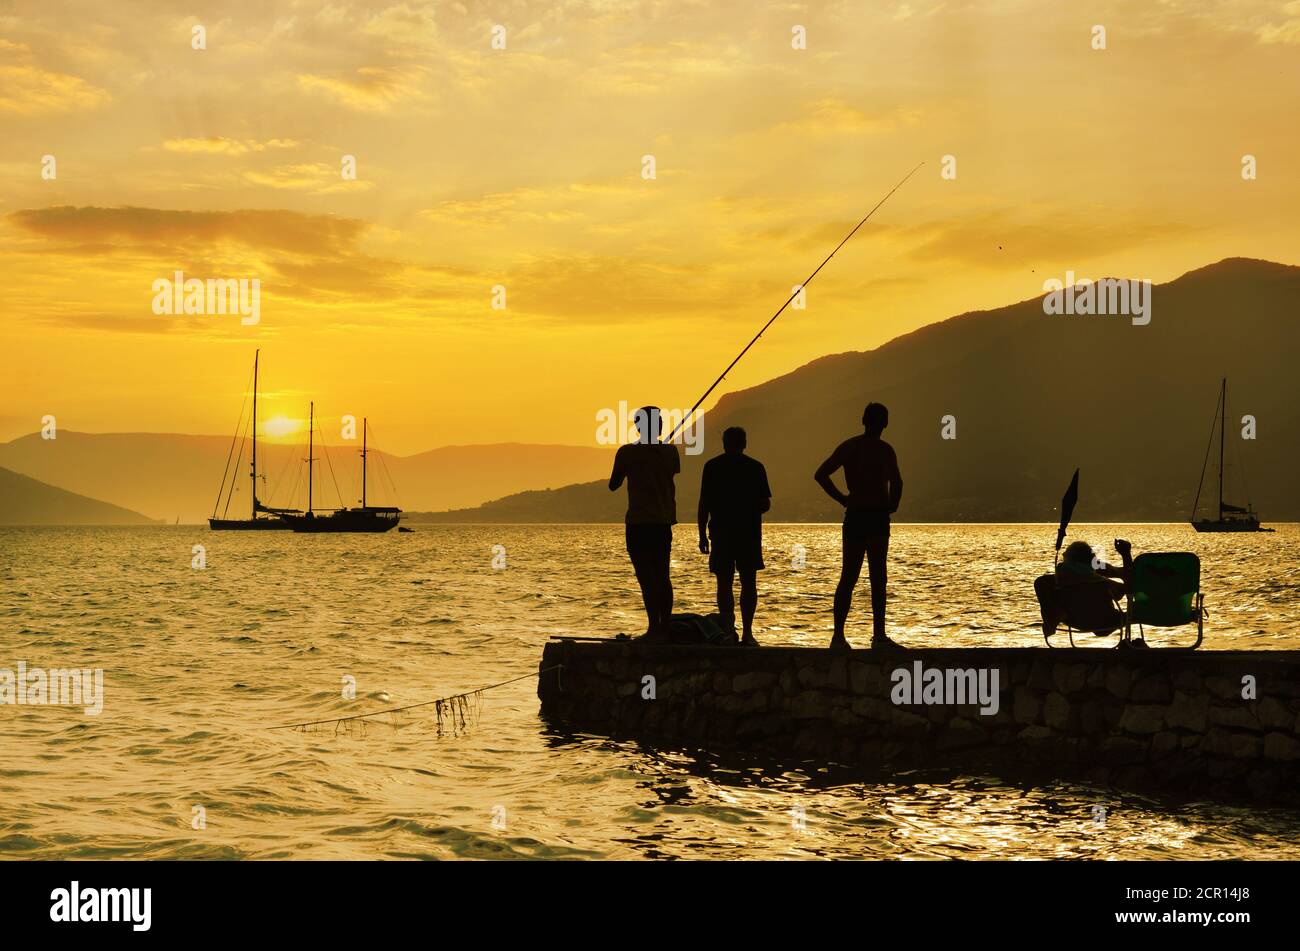 People enjoying life by the sea, leisure, fishing and casual hang out with friends, relaxed folks at sunset Med style Stock Photo